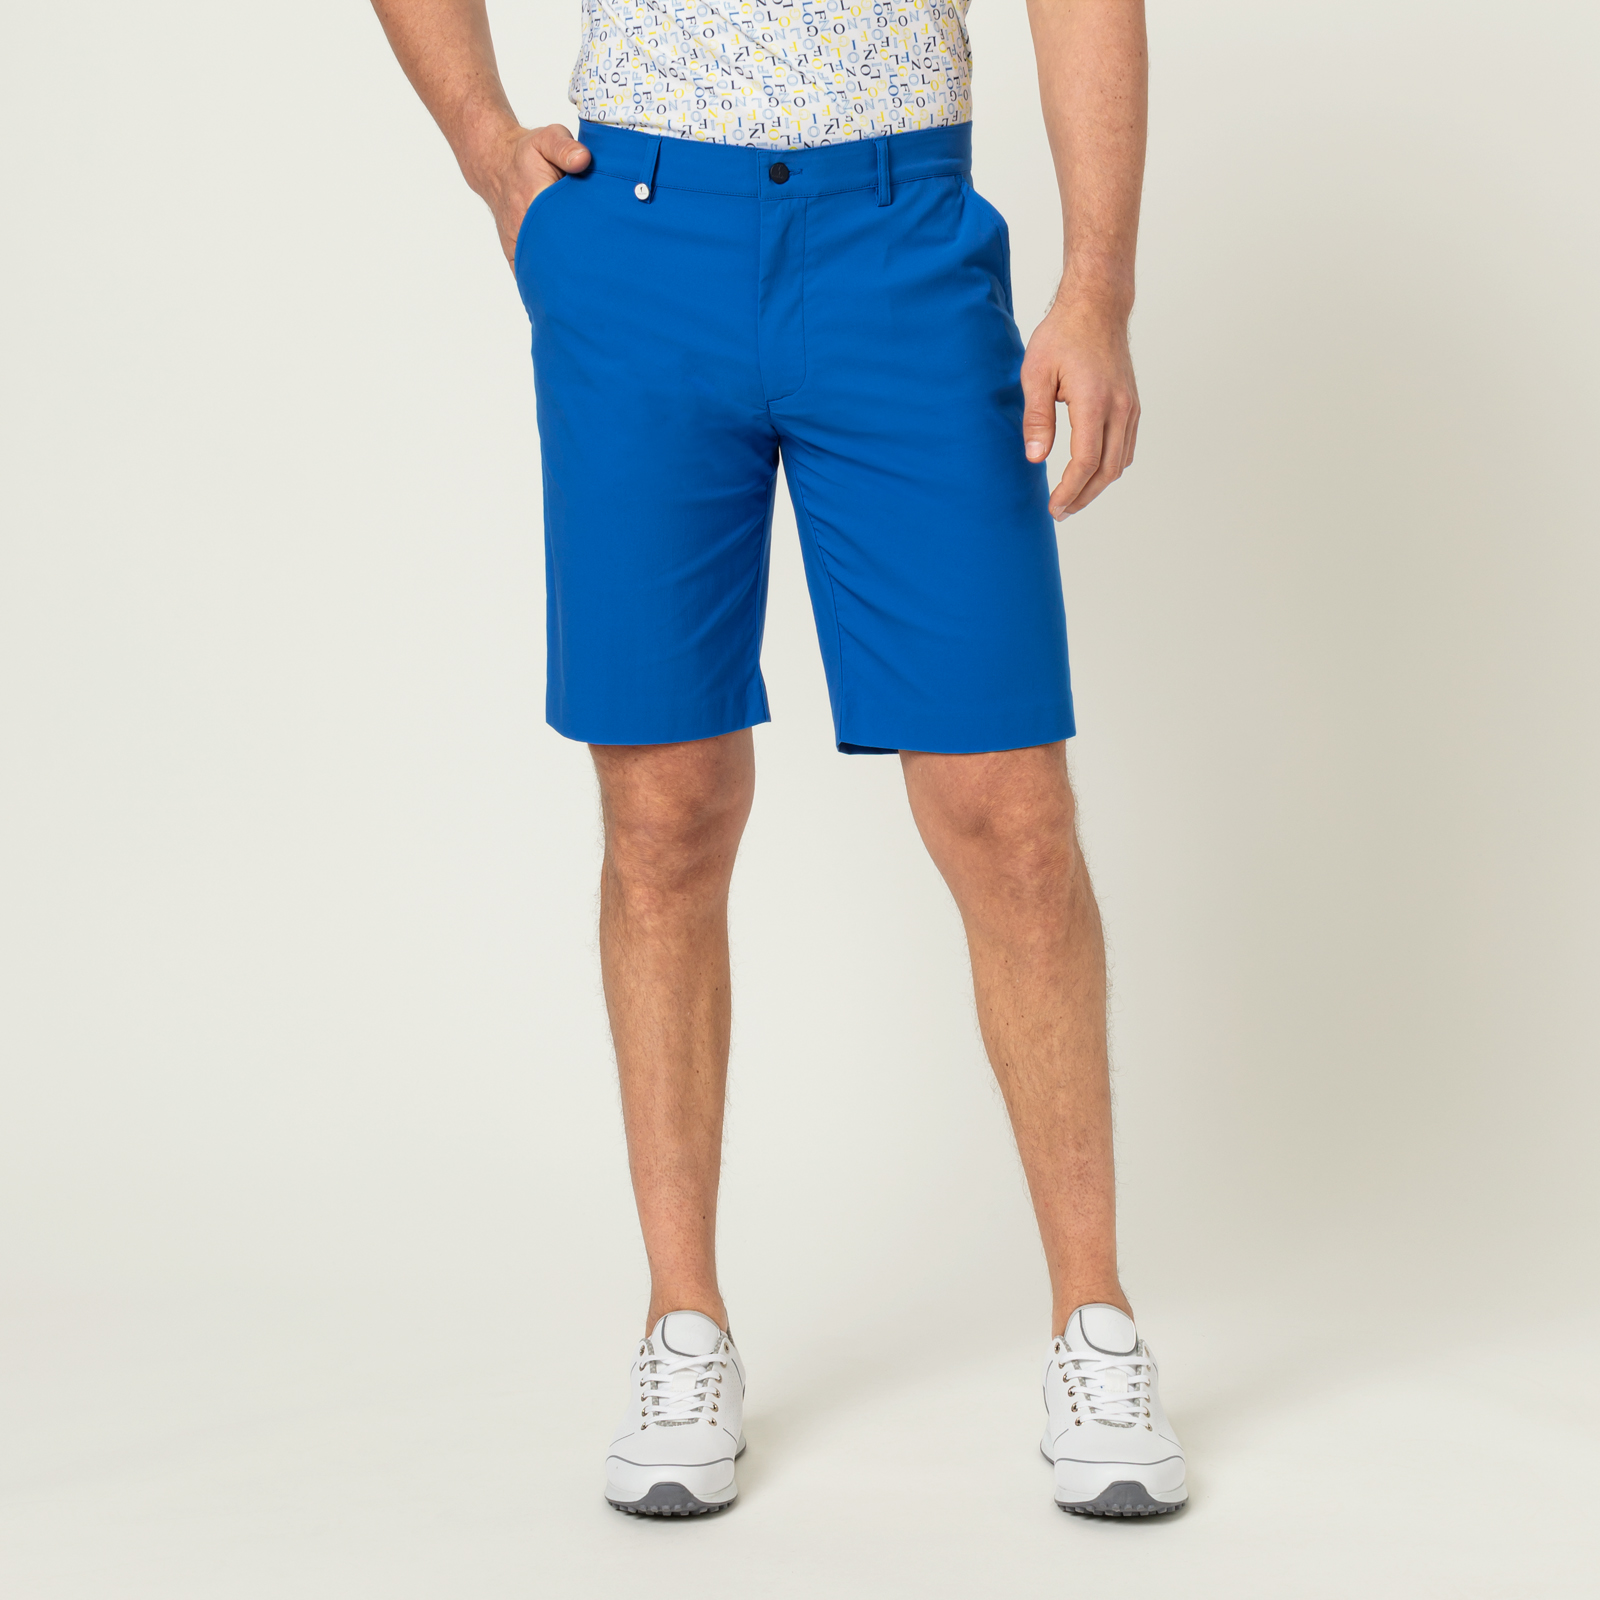 Men's functional Bermuda-style golf shorts with sun protection 